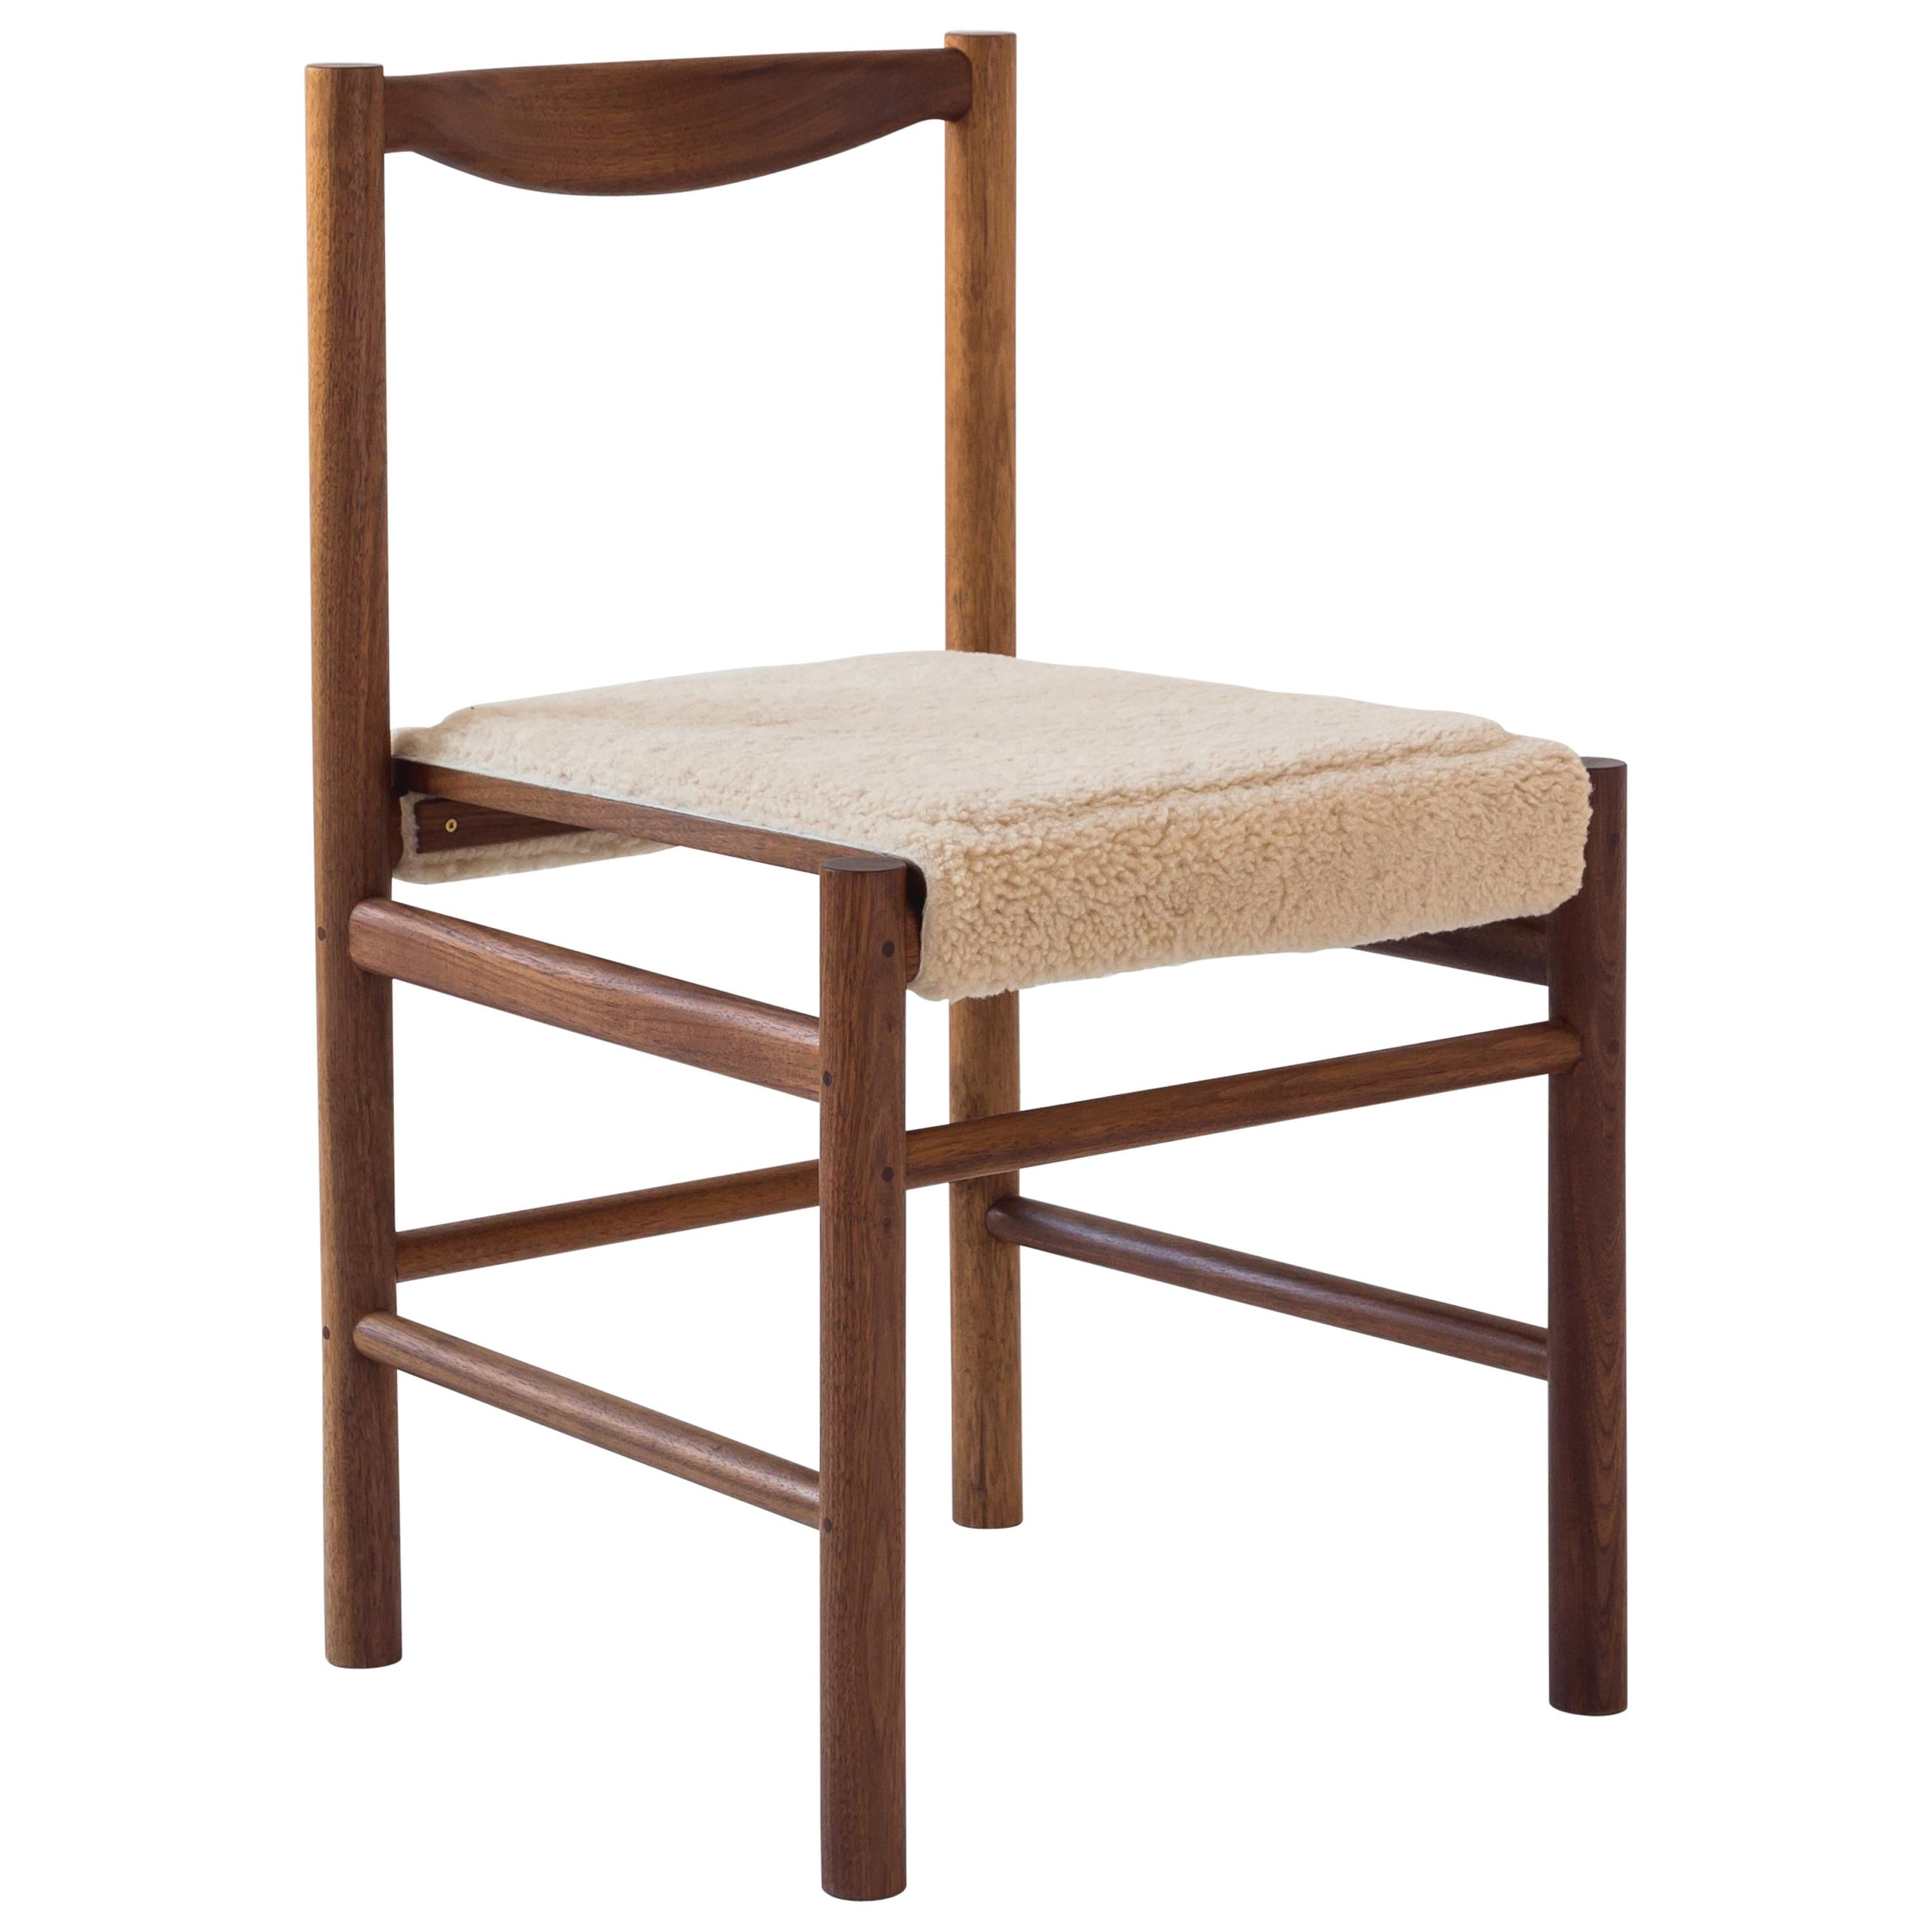 Wood Range Dining Chair in Walnut and Shearling by Fort Standard